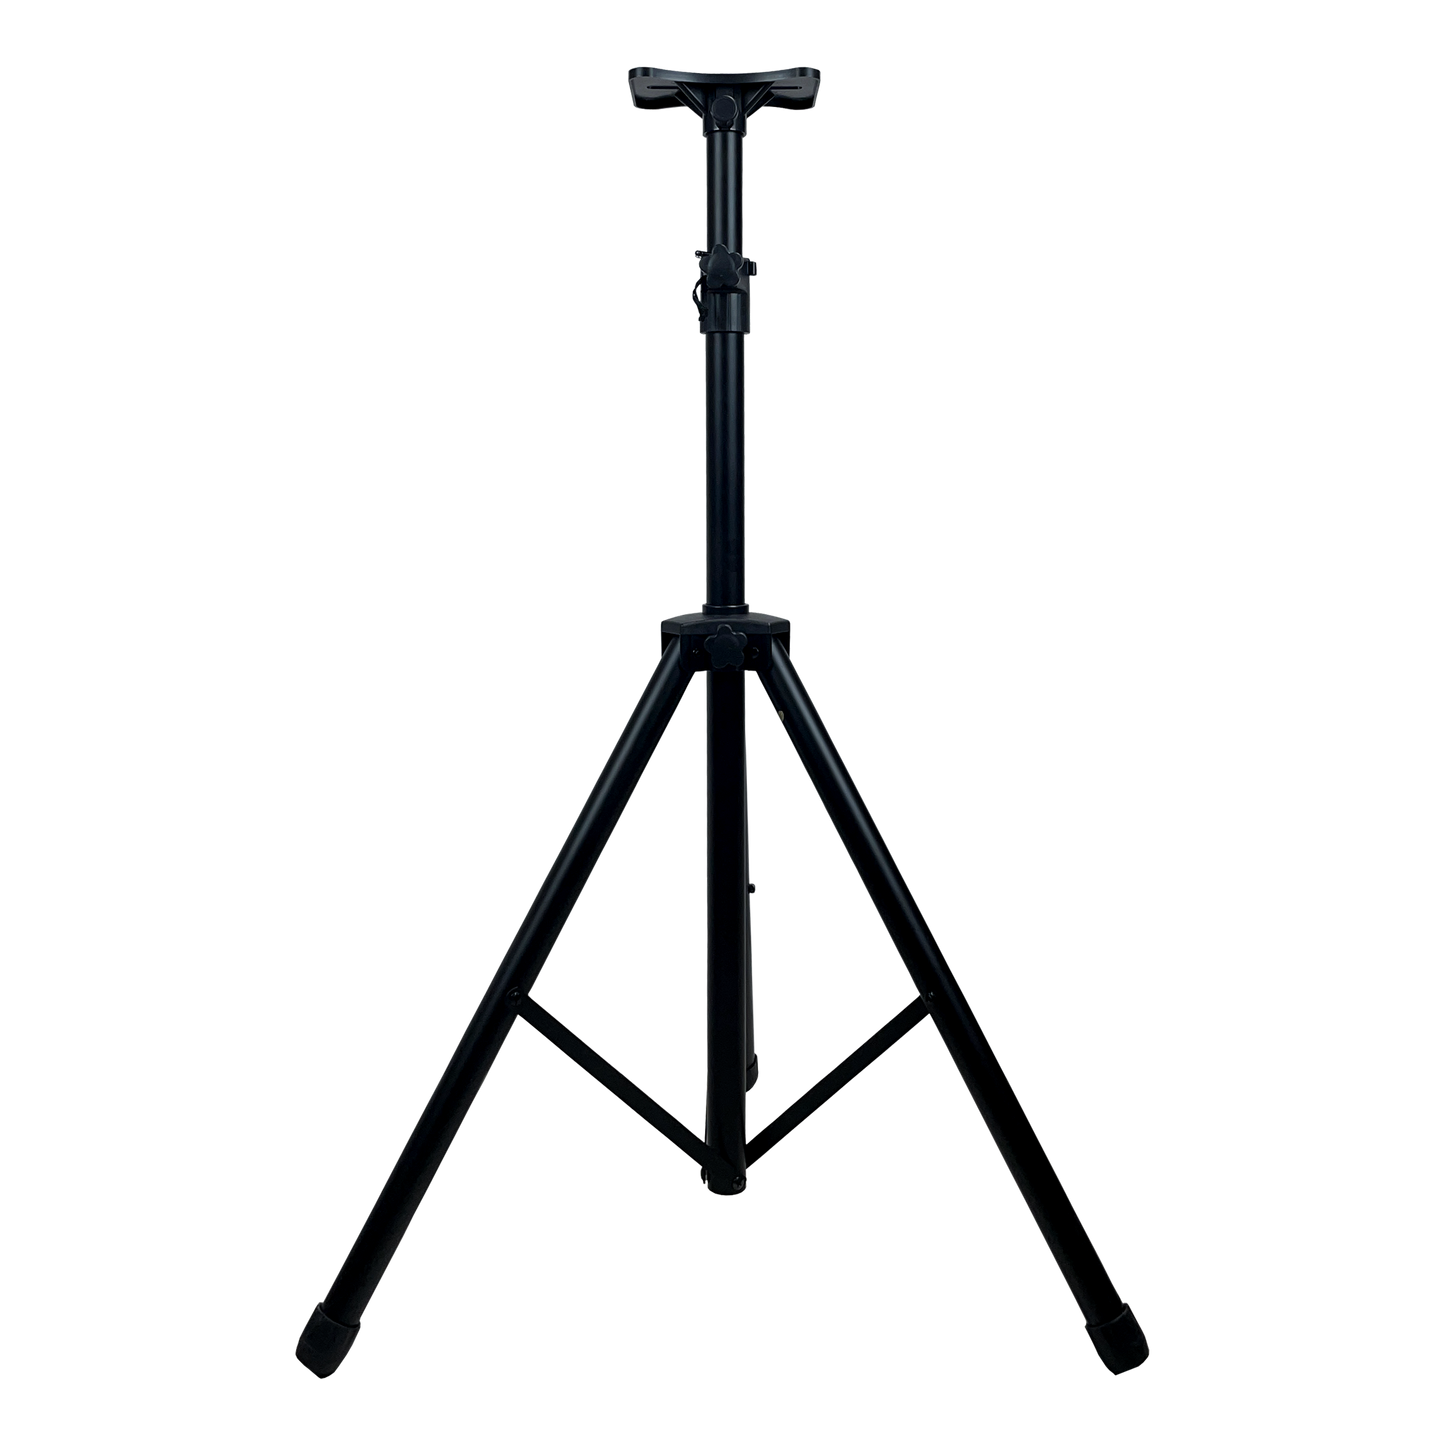 ImPro ST-680 Speaker Stand with Universal Mounting Bracket